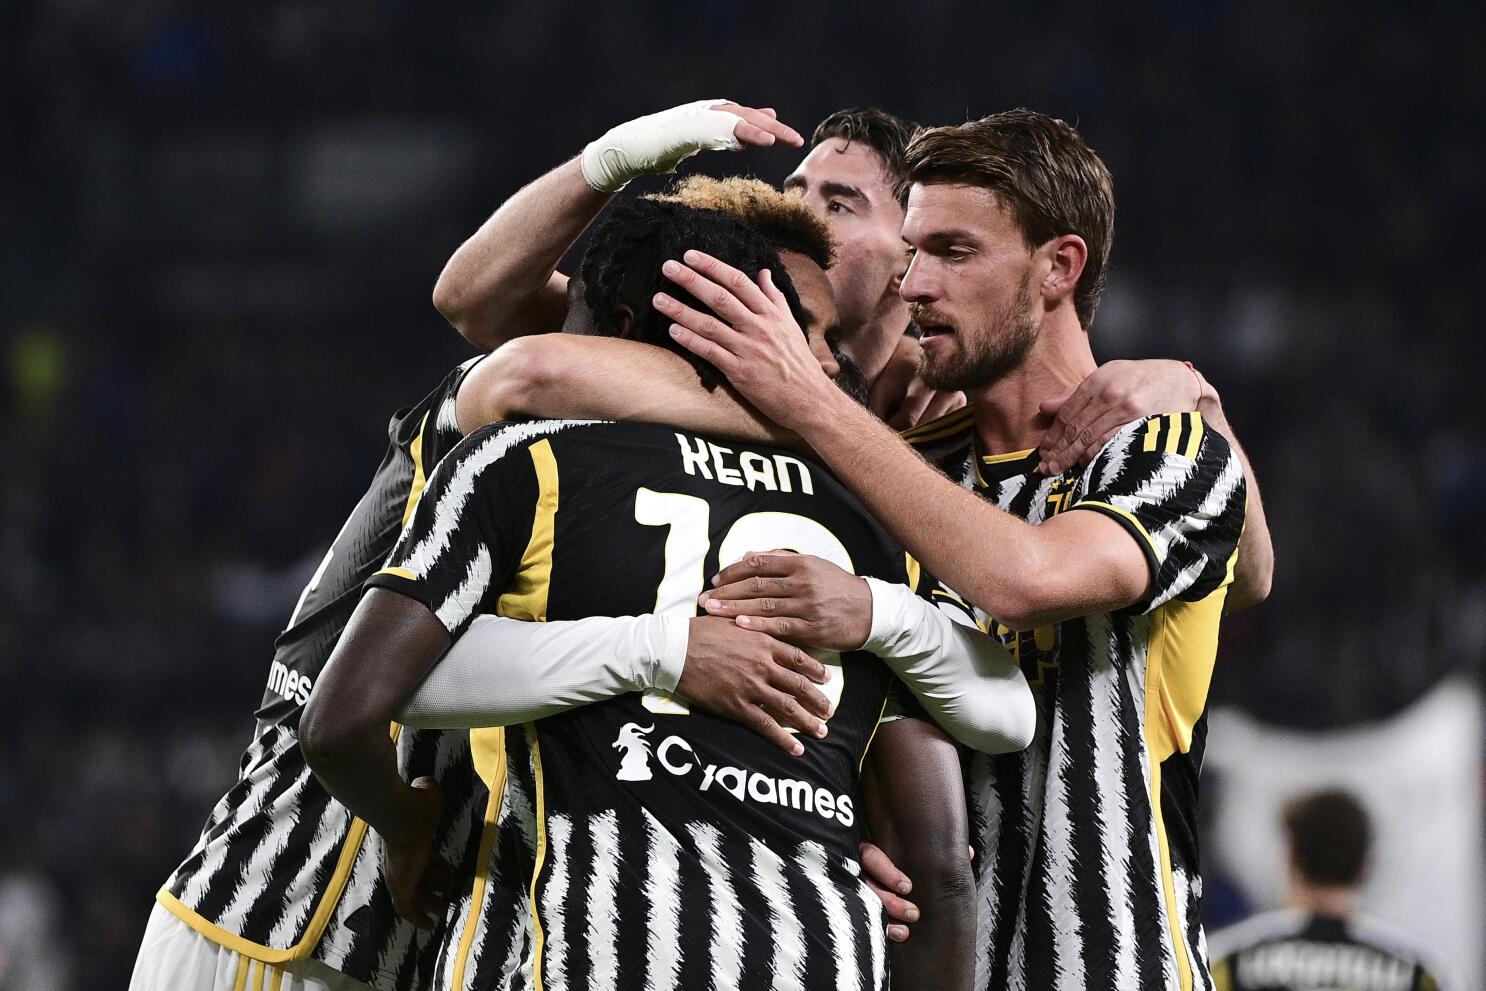 First Team: Juventus Part Two Review